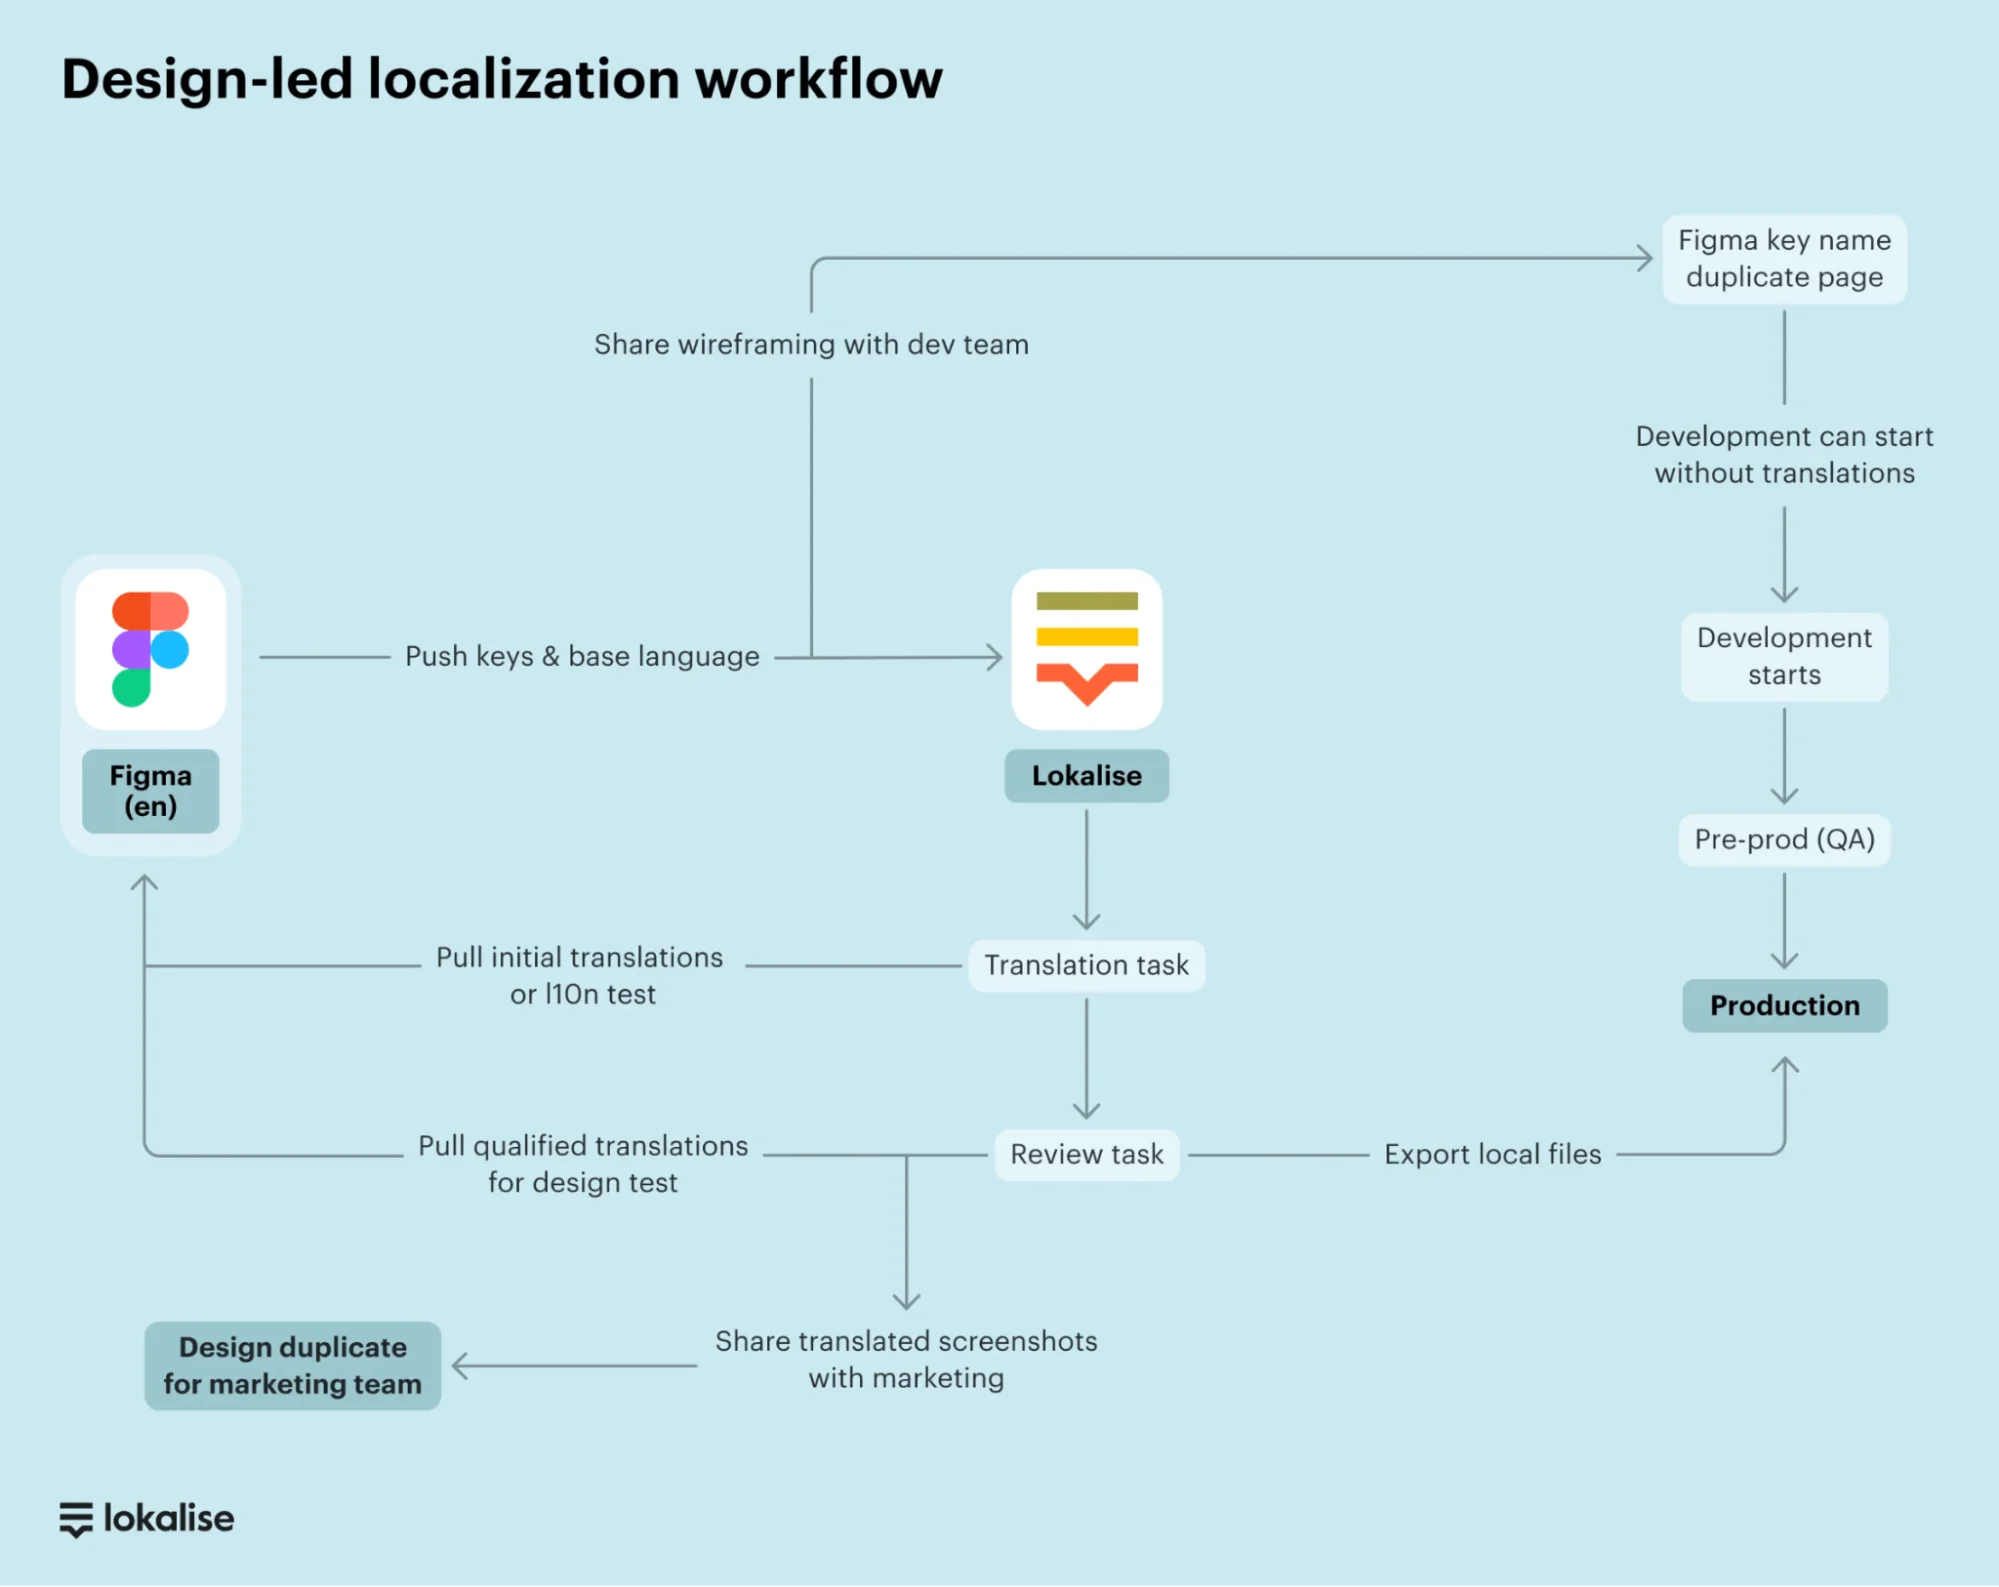 Example of a design-led localization workflow